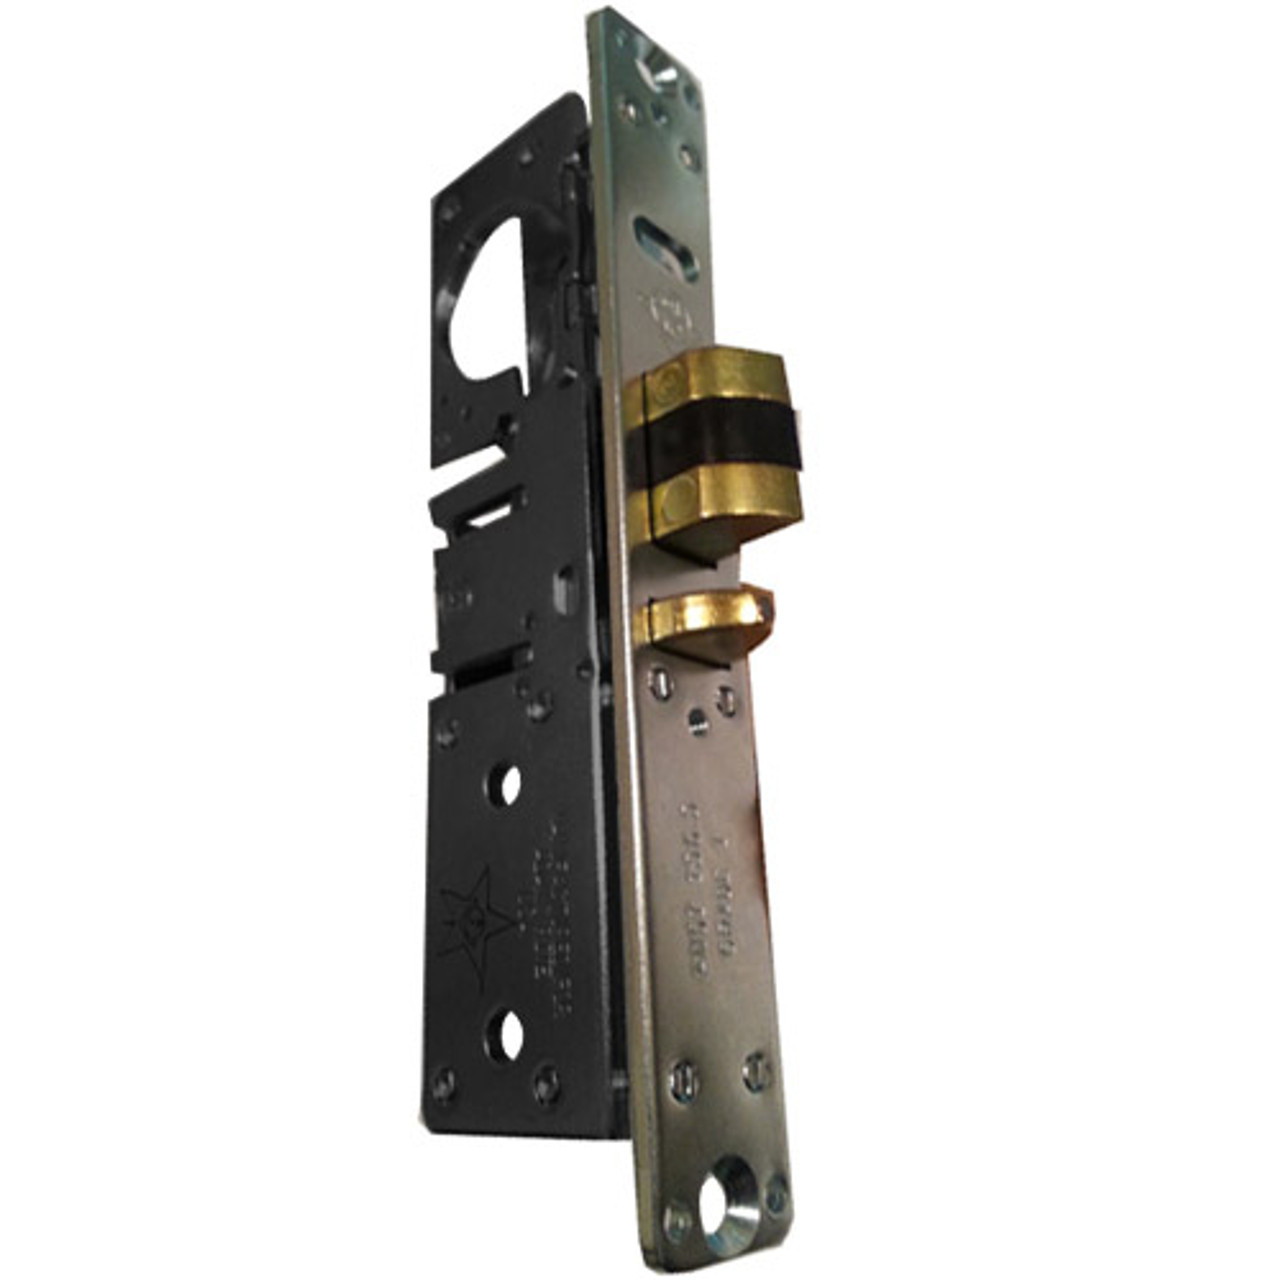 4511W-45-102-335 Adams Rite Standard Deadlatch with Radius Faceplate with weatherstrip in Black Anodized Finish